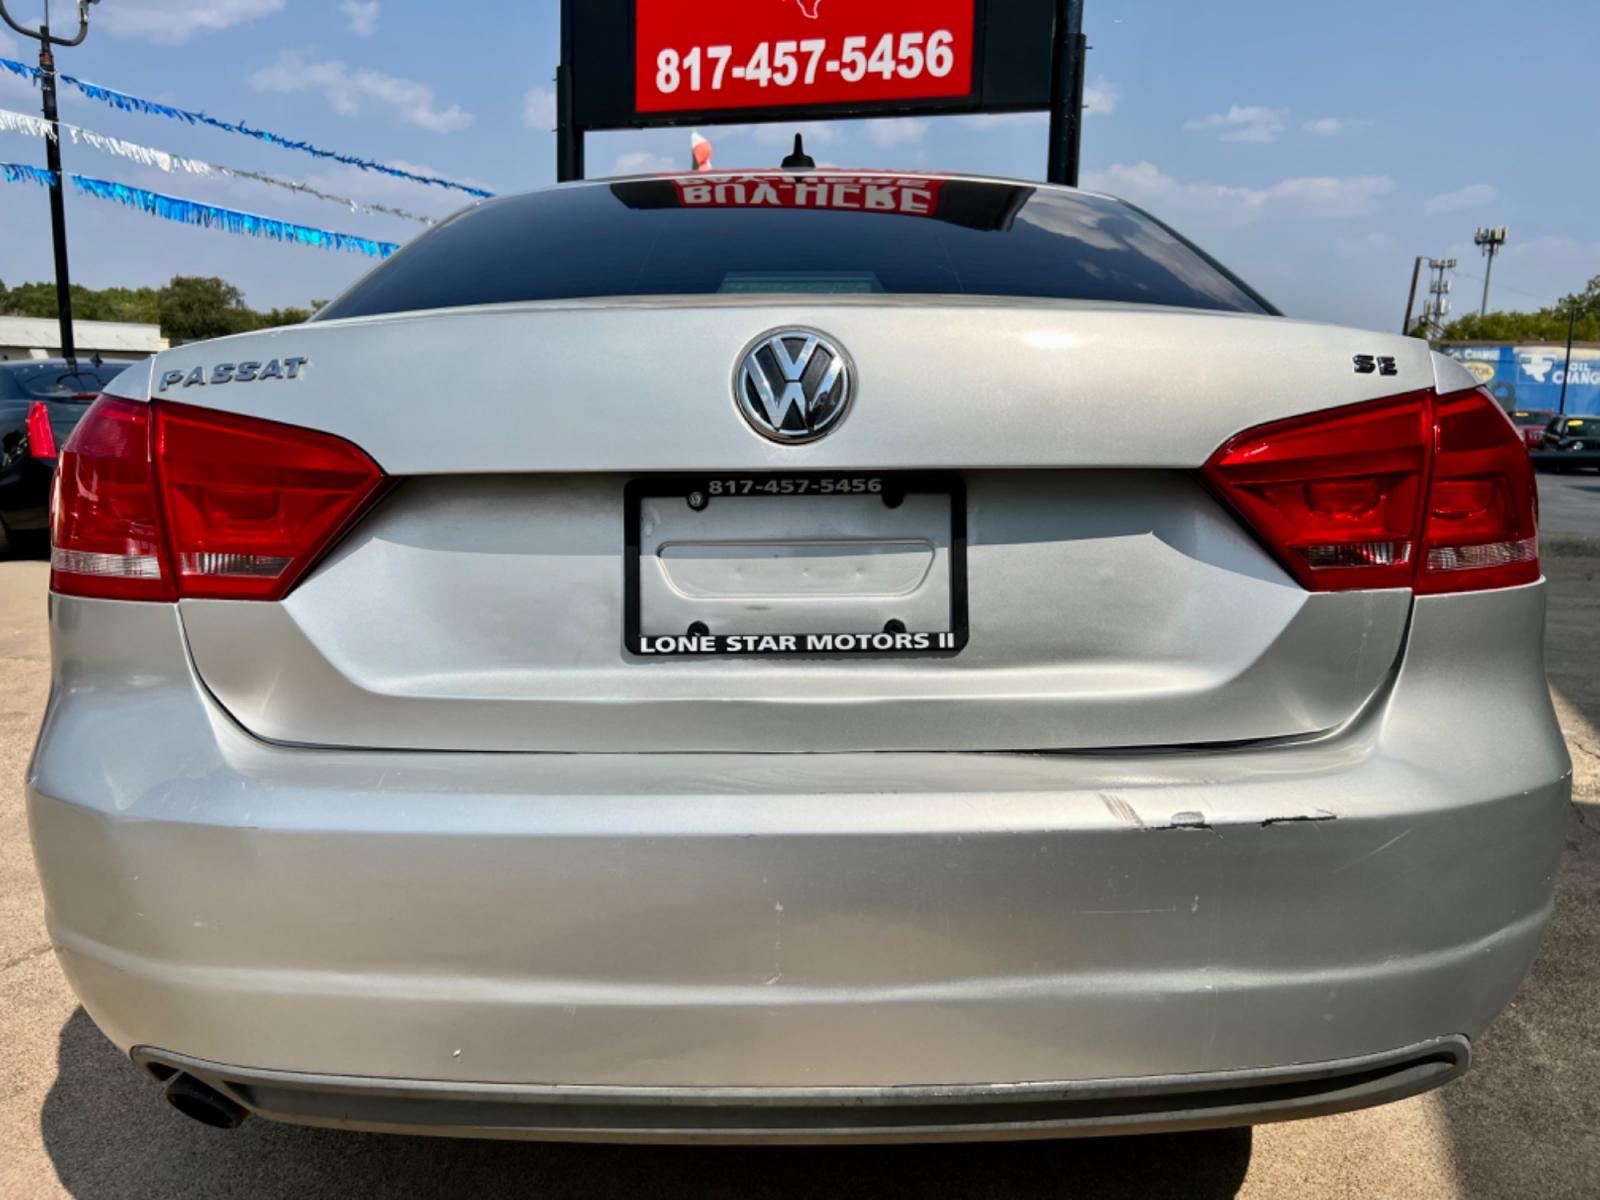 2013 SILVER /Black VOLKSWAGEN PASSAT (1VWBP7A32DC) , located at 5900 E. Lancaster Ave., Fort Worth, TX, 76112, (817) 457-5456, 0.000000, 0.000000 - CASH CAR ONLY, NO FINANCING AVAILABLE. THIS 2013 VOLKSWAGEN PASSAT 4 DOOR SEDAN RUNS AND DRIVES GREAT. IT IS EQUIPPED WITH A CD PLAYER, AM/FM RADIO AND AN AUX PORT. THE TIRES ARE IN GOOD CONDITION AND STILL HAVE TREAD LEFT ON THEM. THIS CAR WILL NOT LAST SO ACT FAST! Call or text Frances at 68 - Photo #5